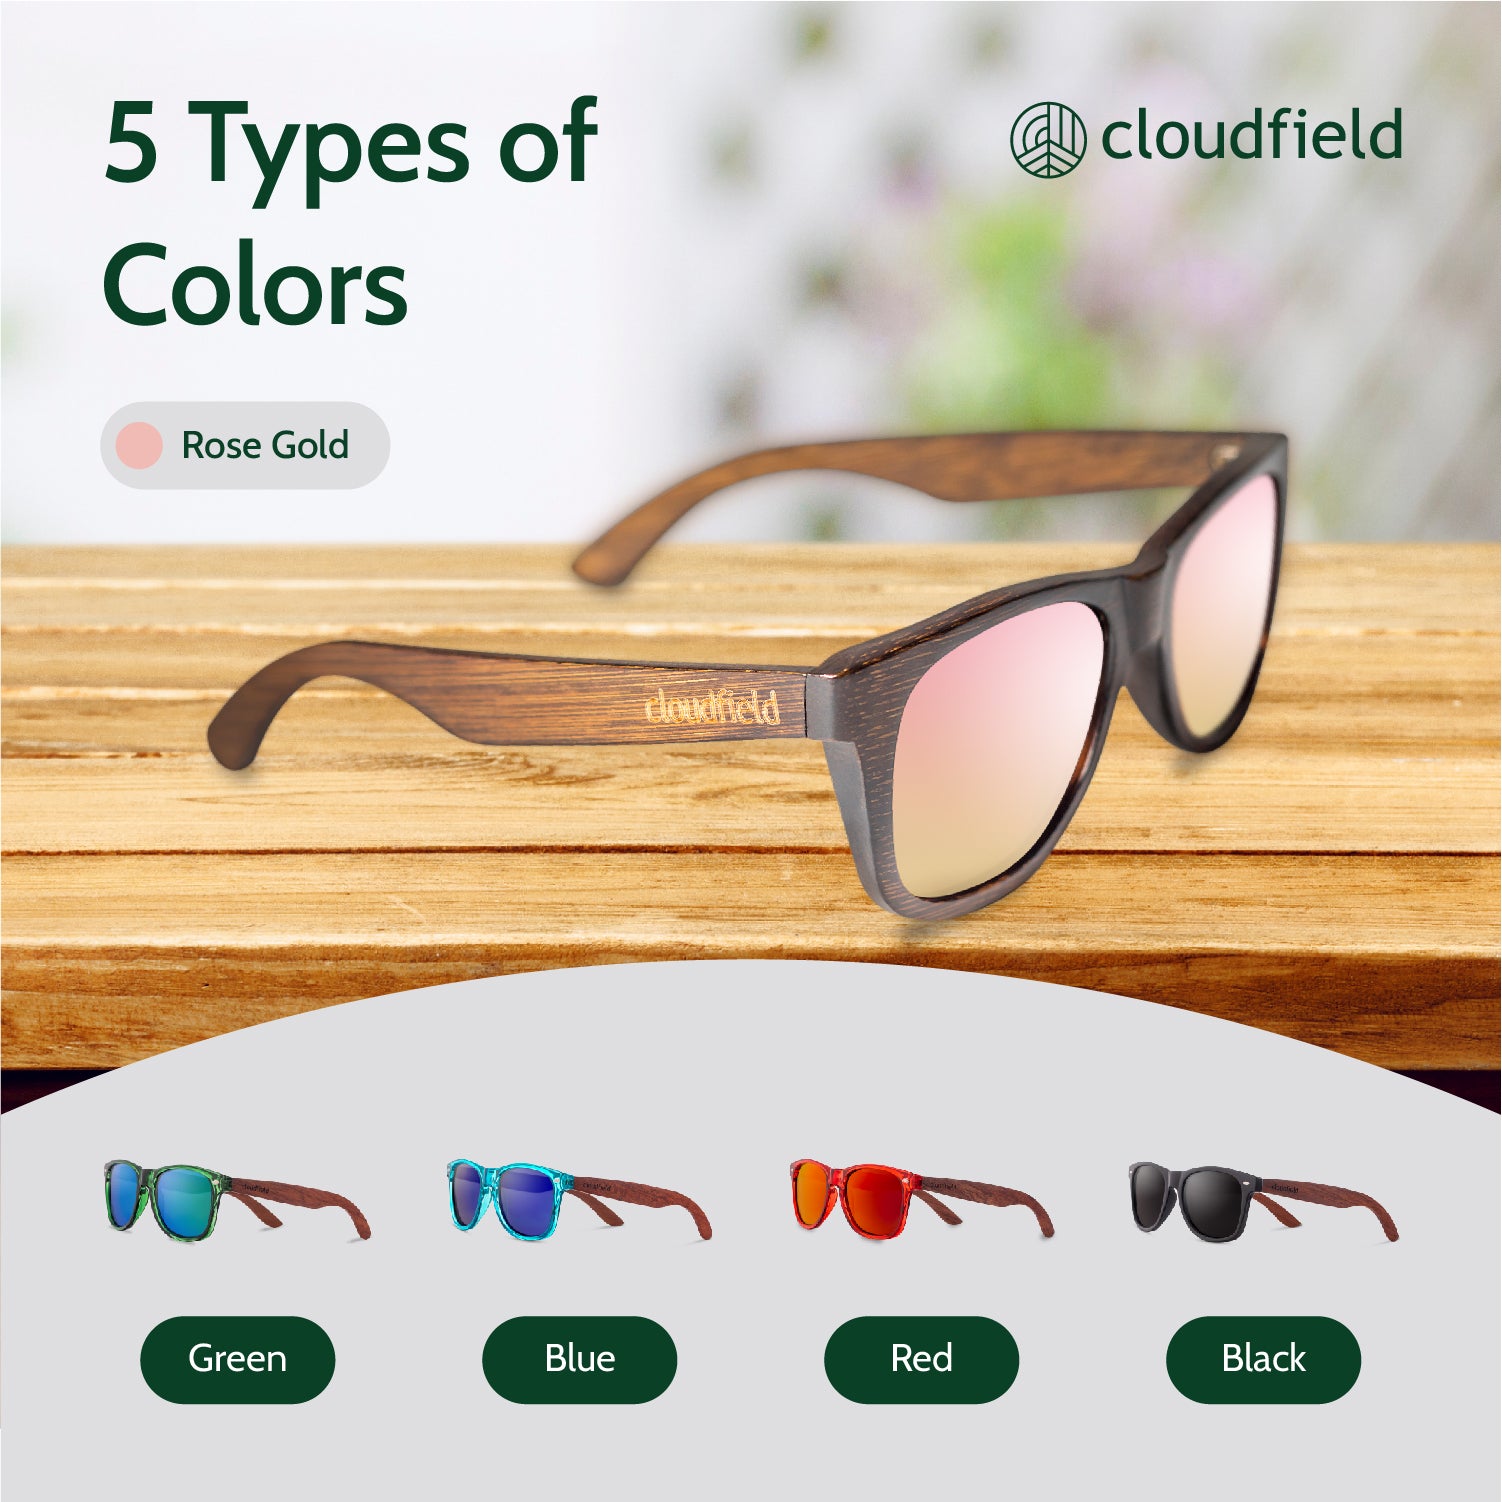 rose gold cloudfiled polarized sunglasses